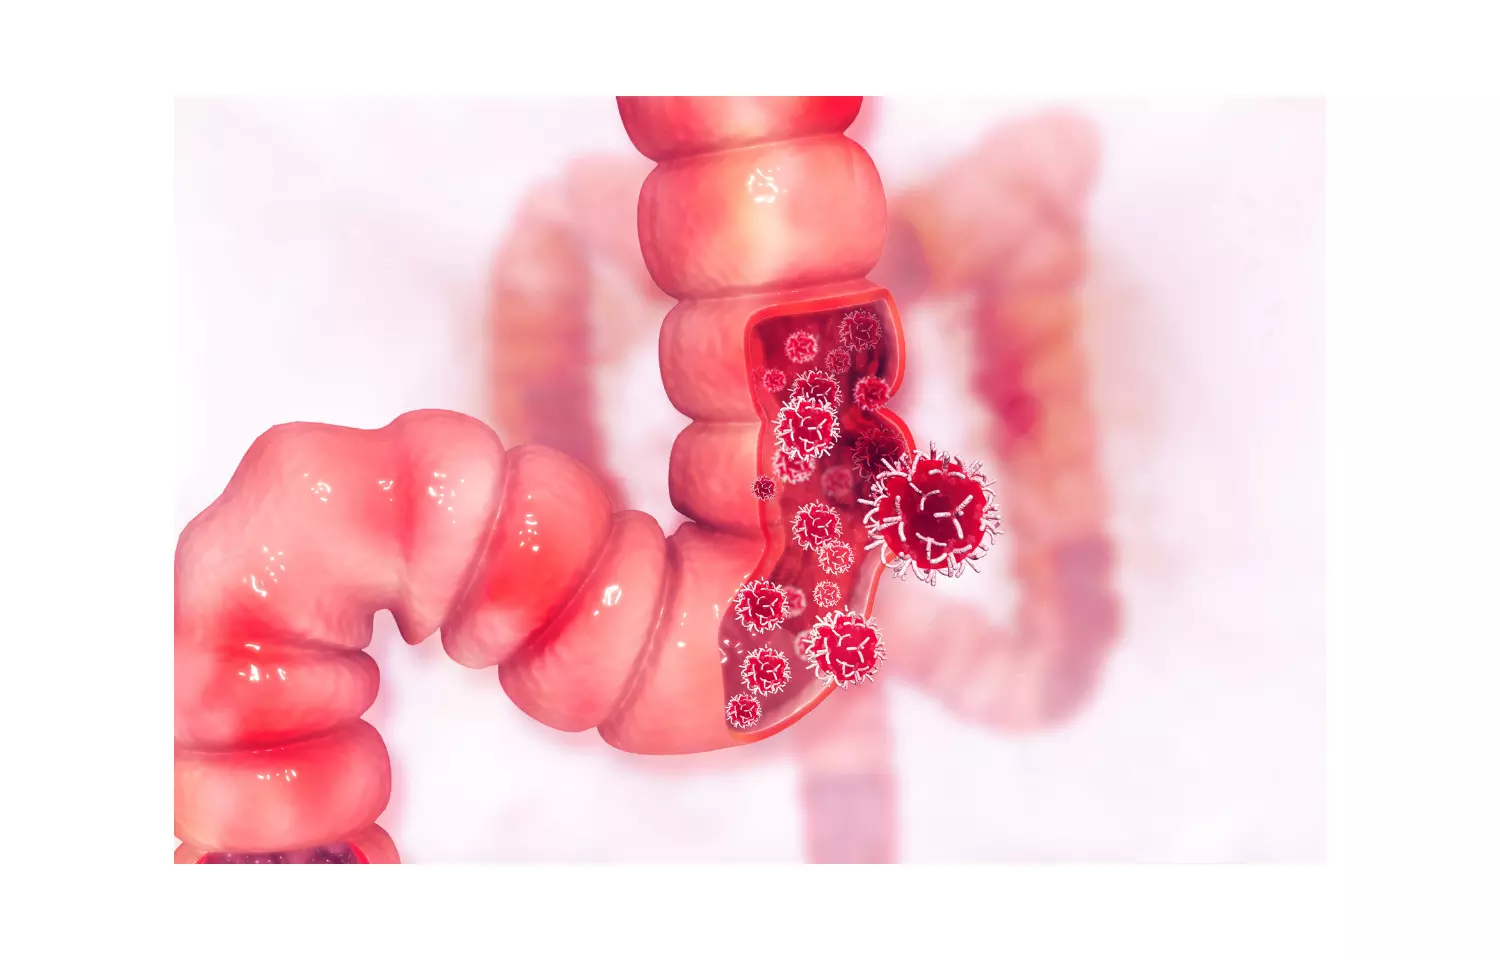 Chronic constipation not associated with colorectal cancer, study finds